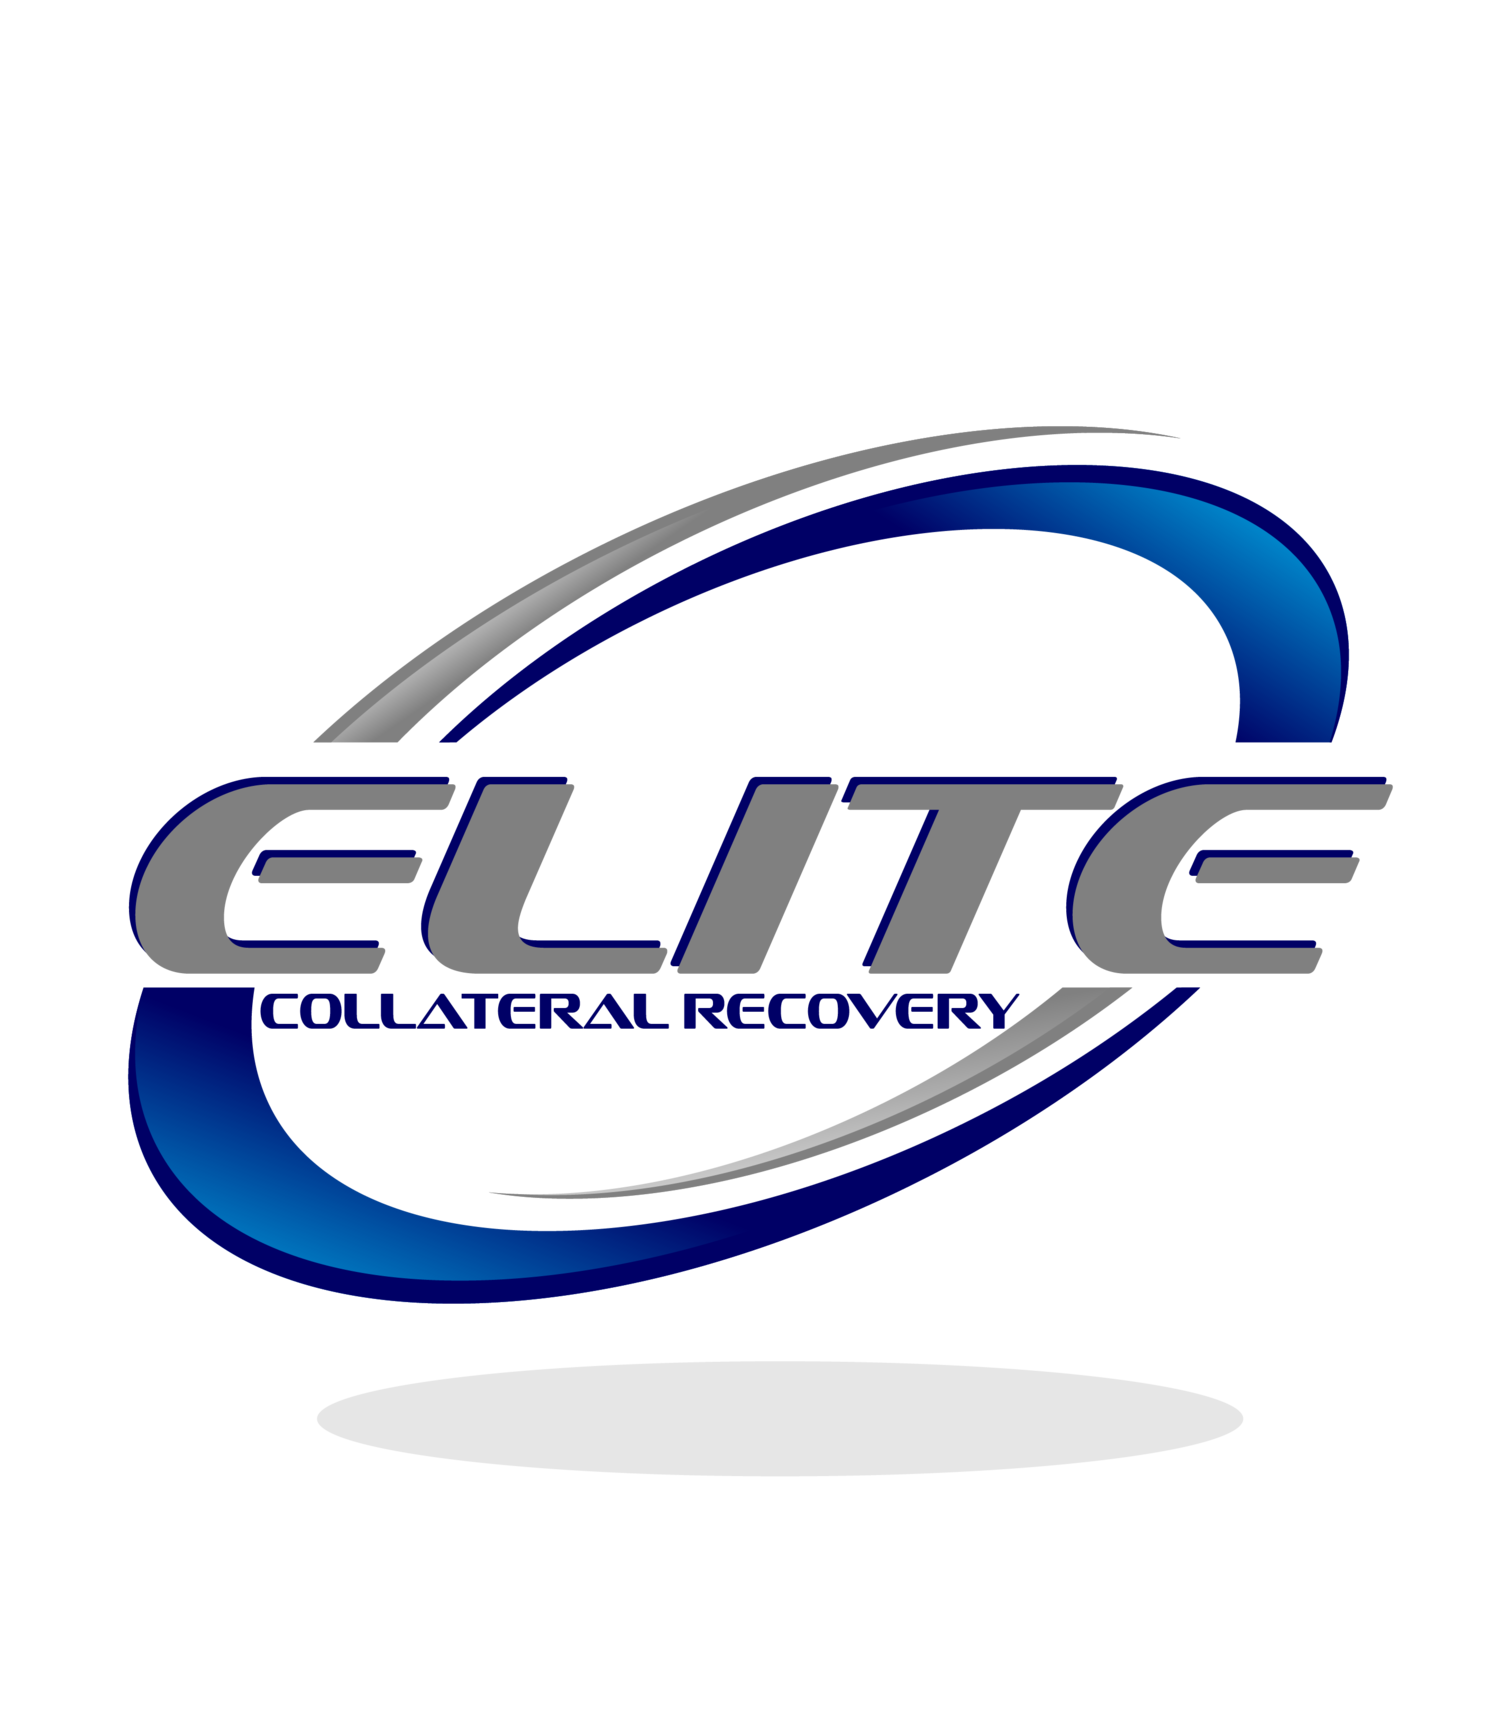 Elite Collateral Recovery, INC. 